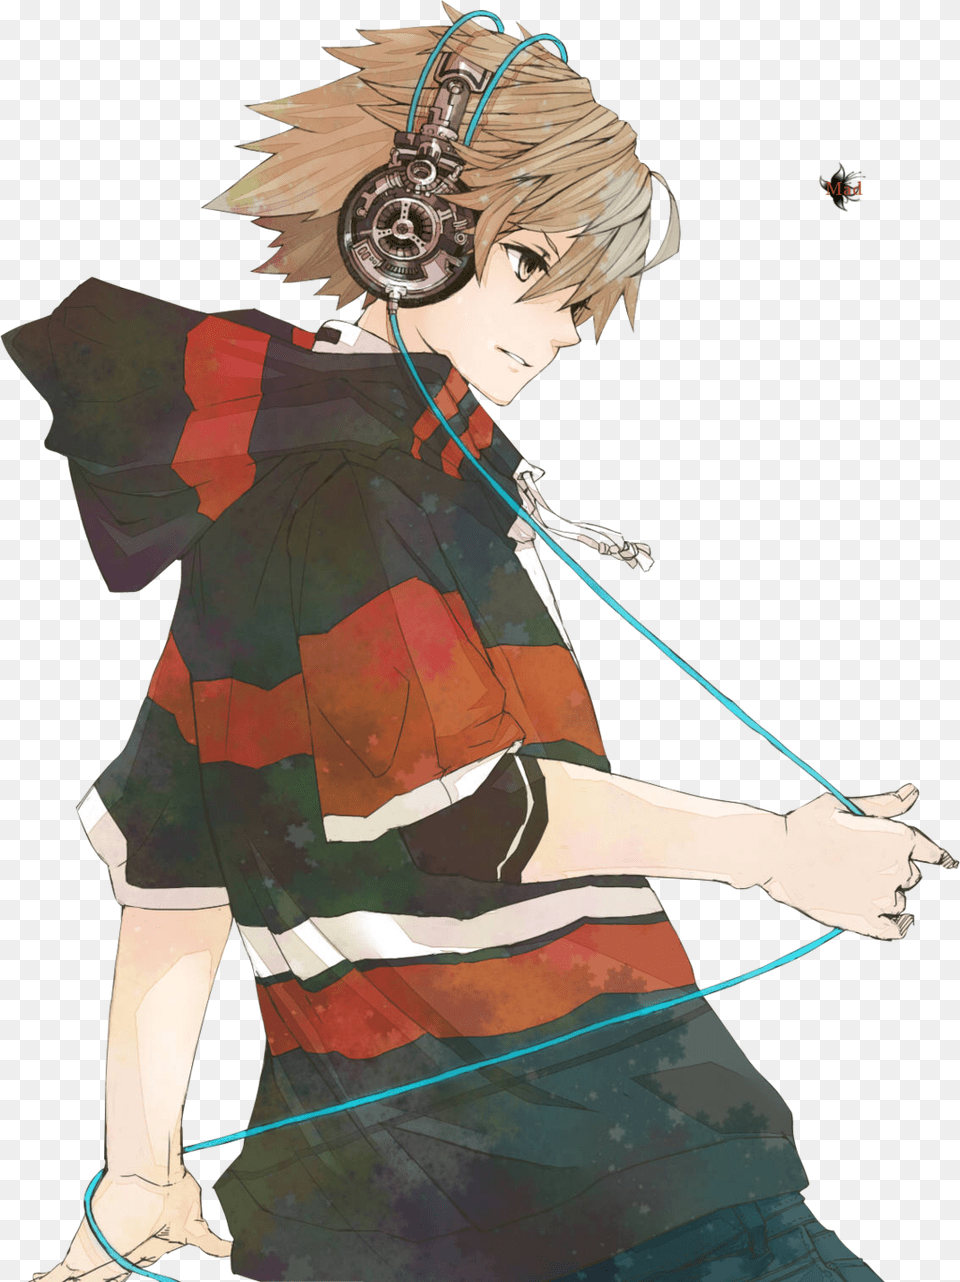 Anime Boy Is Listening Music Image Anime Boy Listening To Music, Person, Book, Comics, Publication Png